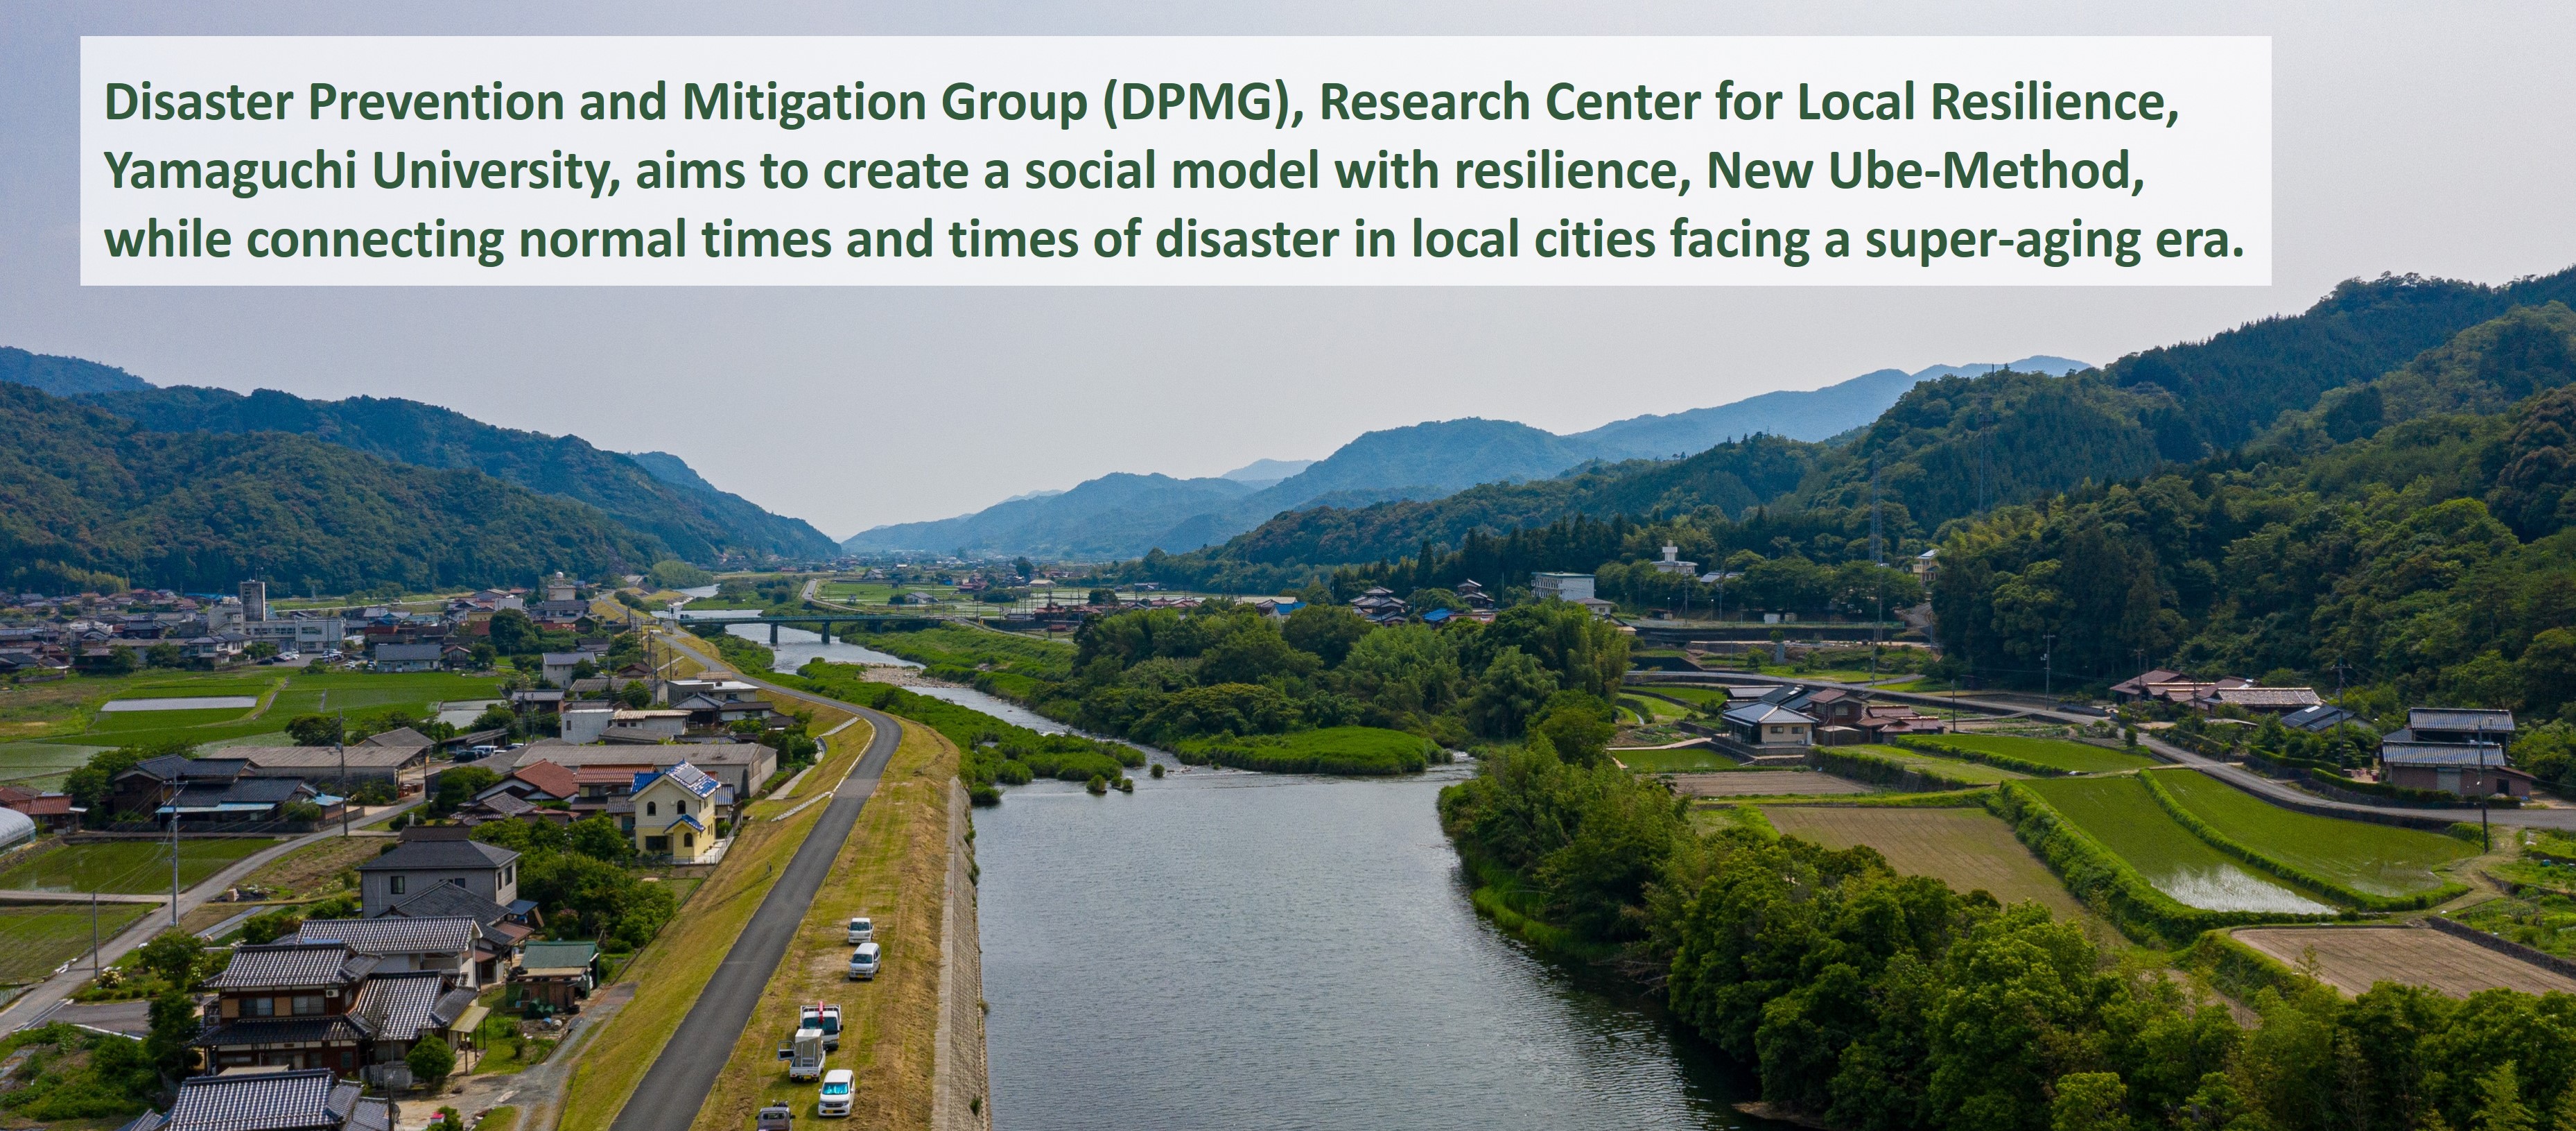 Center for Local Disaster Prevention and Mitigation (CLDPM), Yamaguchi University
aims to create an SDGs glocal community that realizes safety and security, solves problems of disaster prevention and mitigation, medical care, and public health in local cities, and propose a sustainable urban society model “New Ube Method